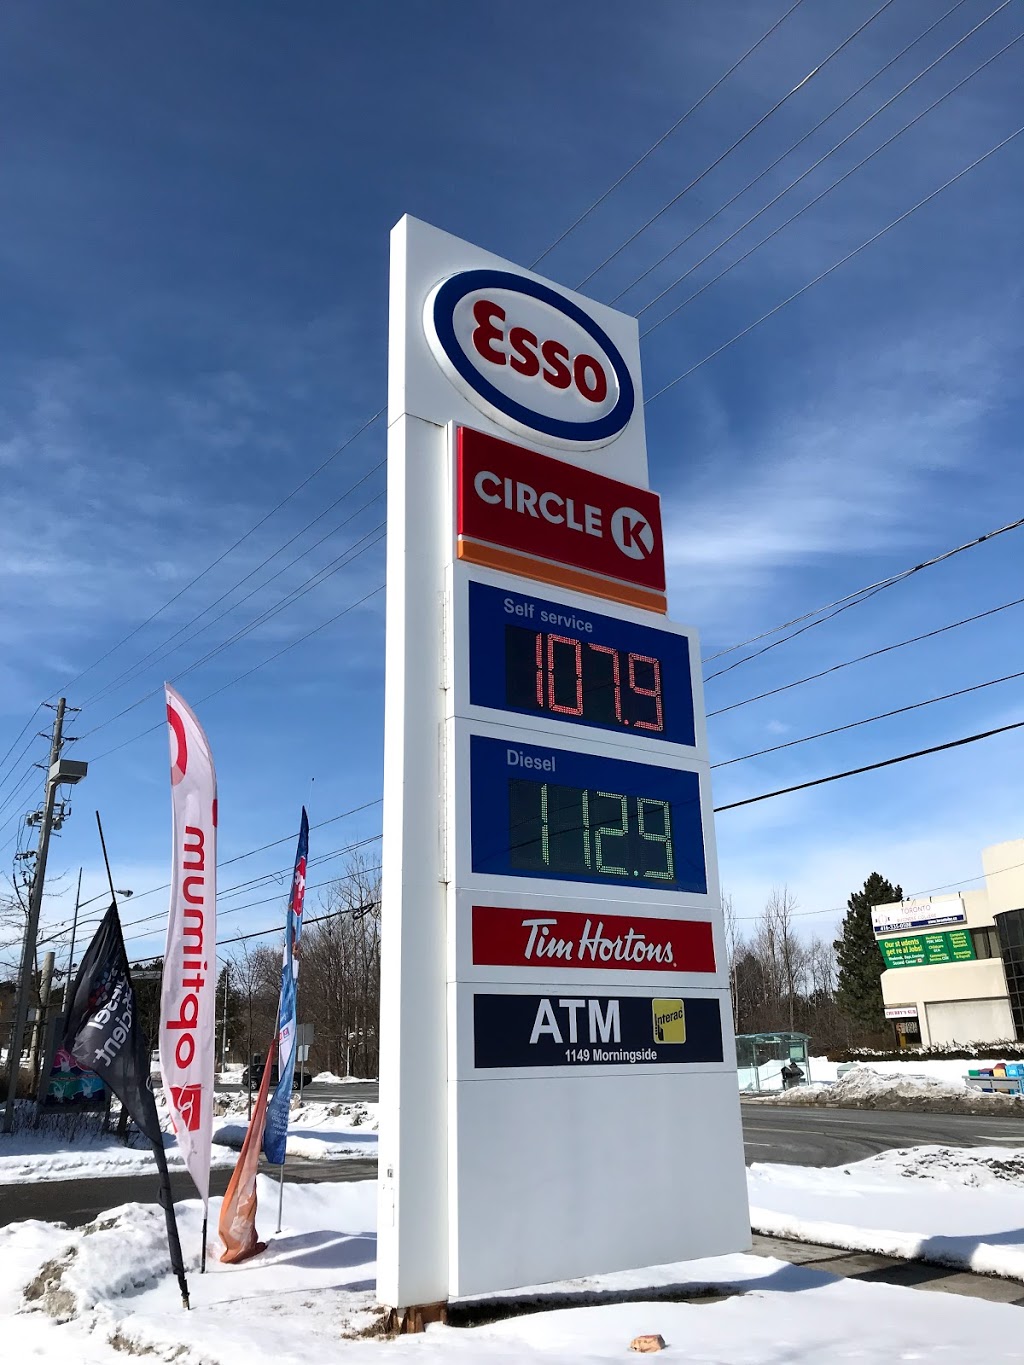 Esso | 1149 Morningside Ave, Scarborough, ON M1B 5J3, Canada | Phone: (416) 283-3662